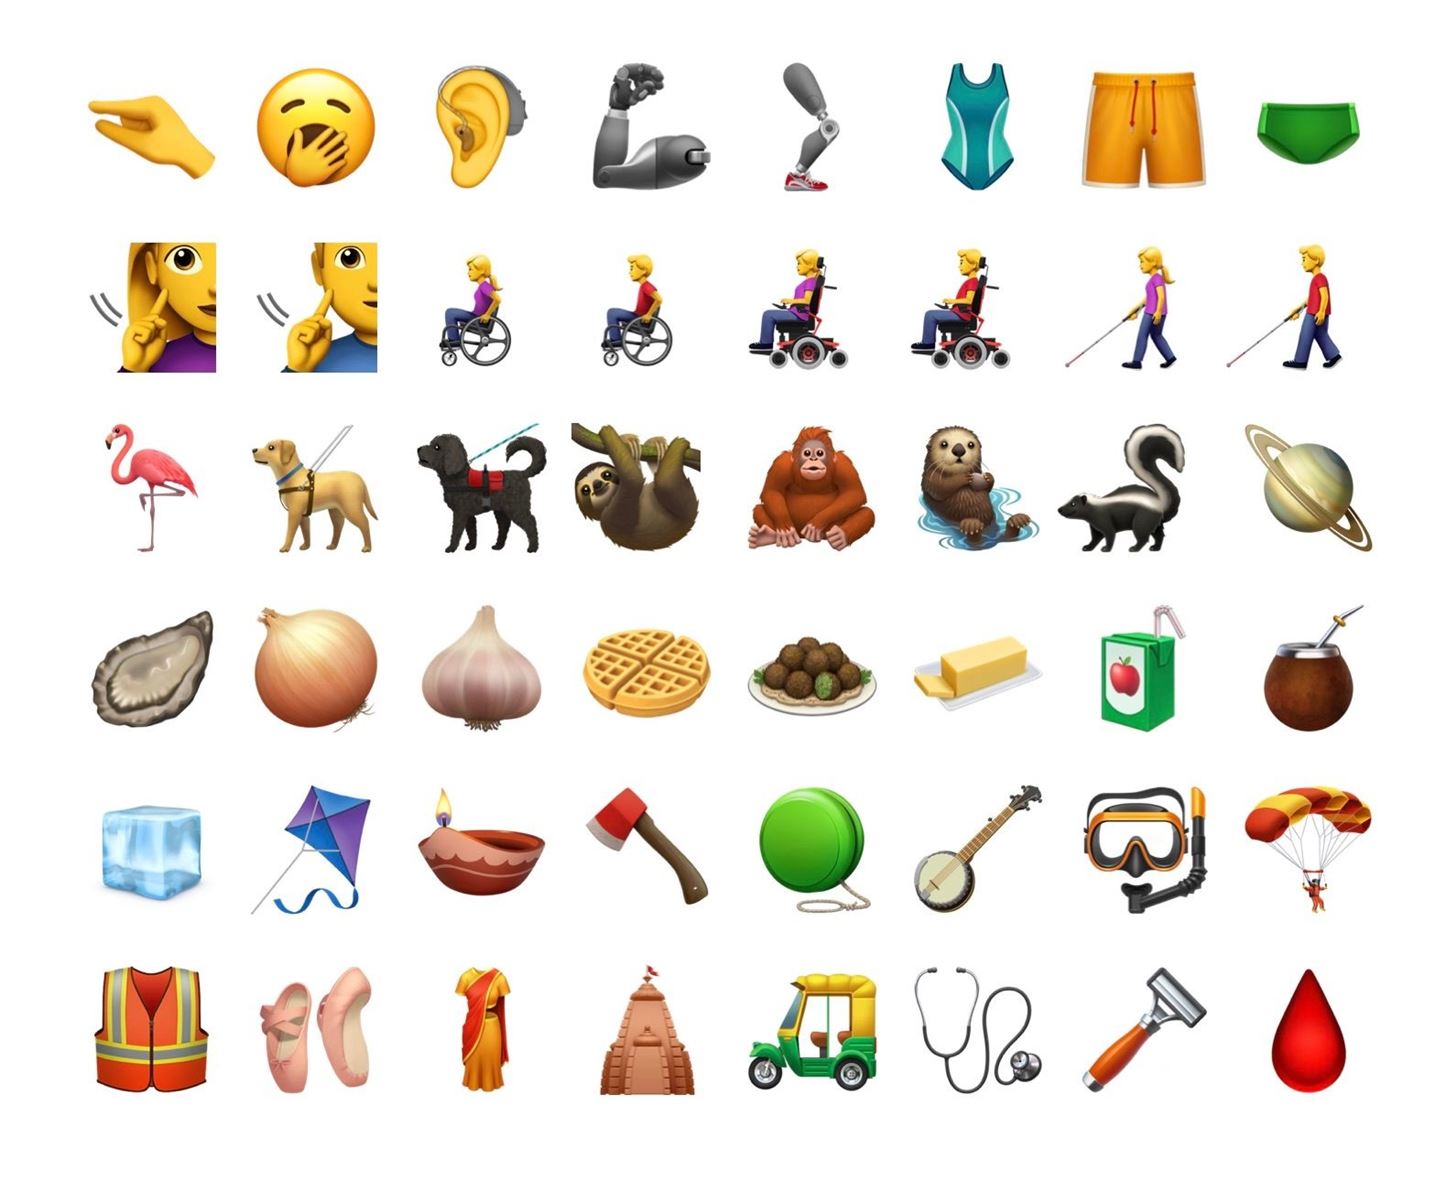 The Second iOS 13.2 Public Beta Is Out, Includes New Emoji, In-App Camera Settings & More